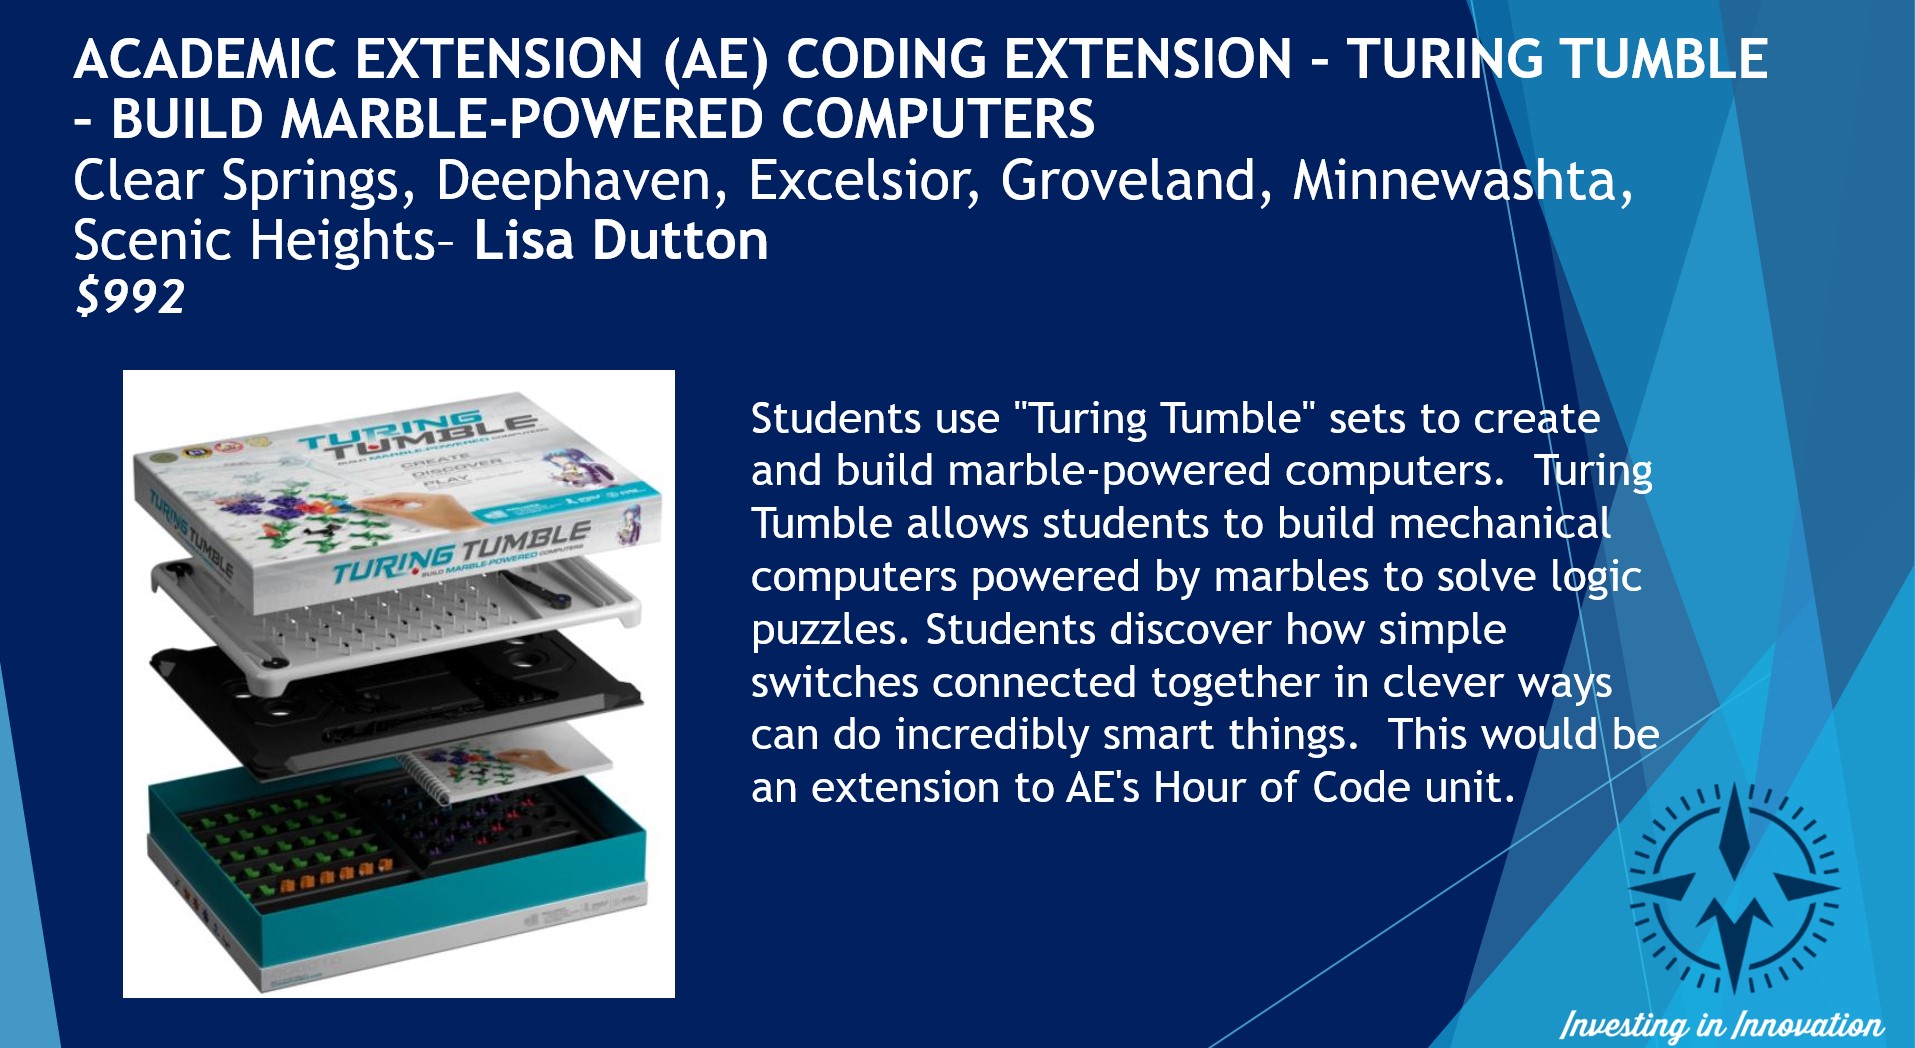 AE Coding Extension - Turing Tumble